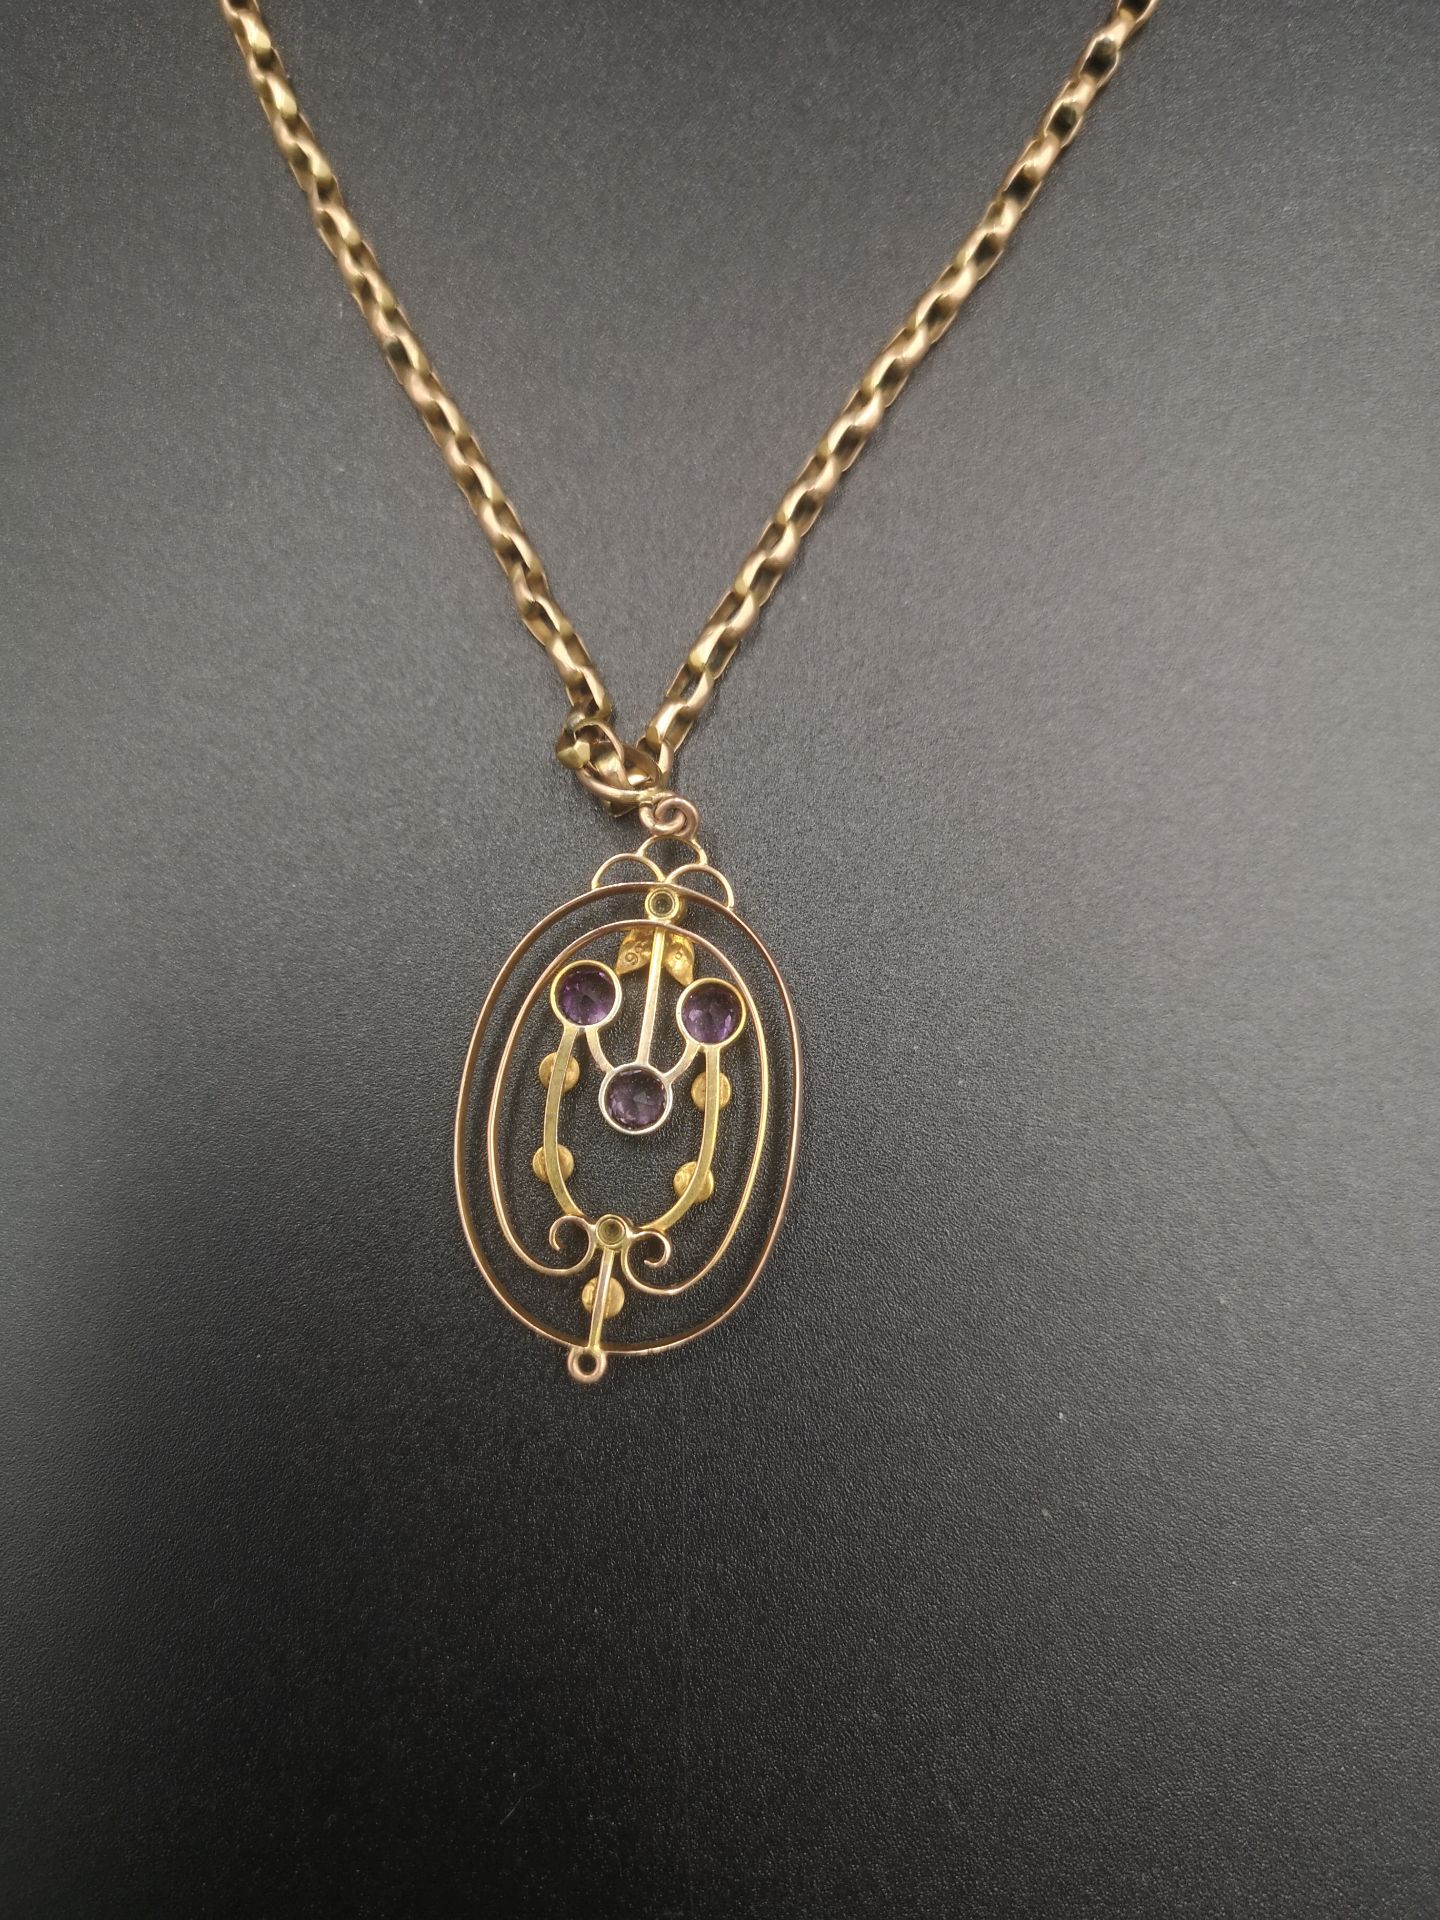 Yellow metal necklace with 9ct gold pendant - Image 2 of 5